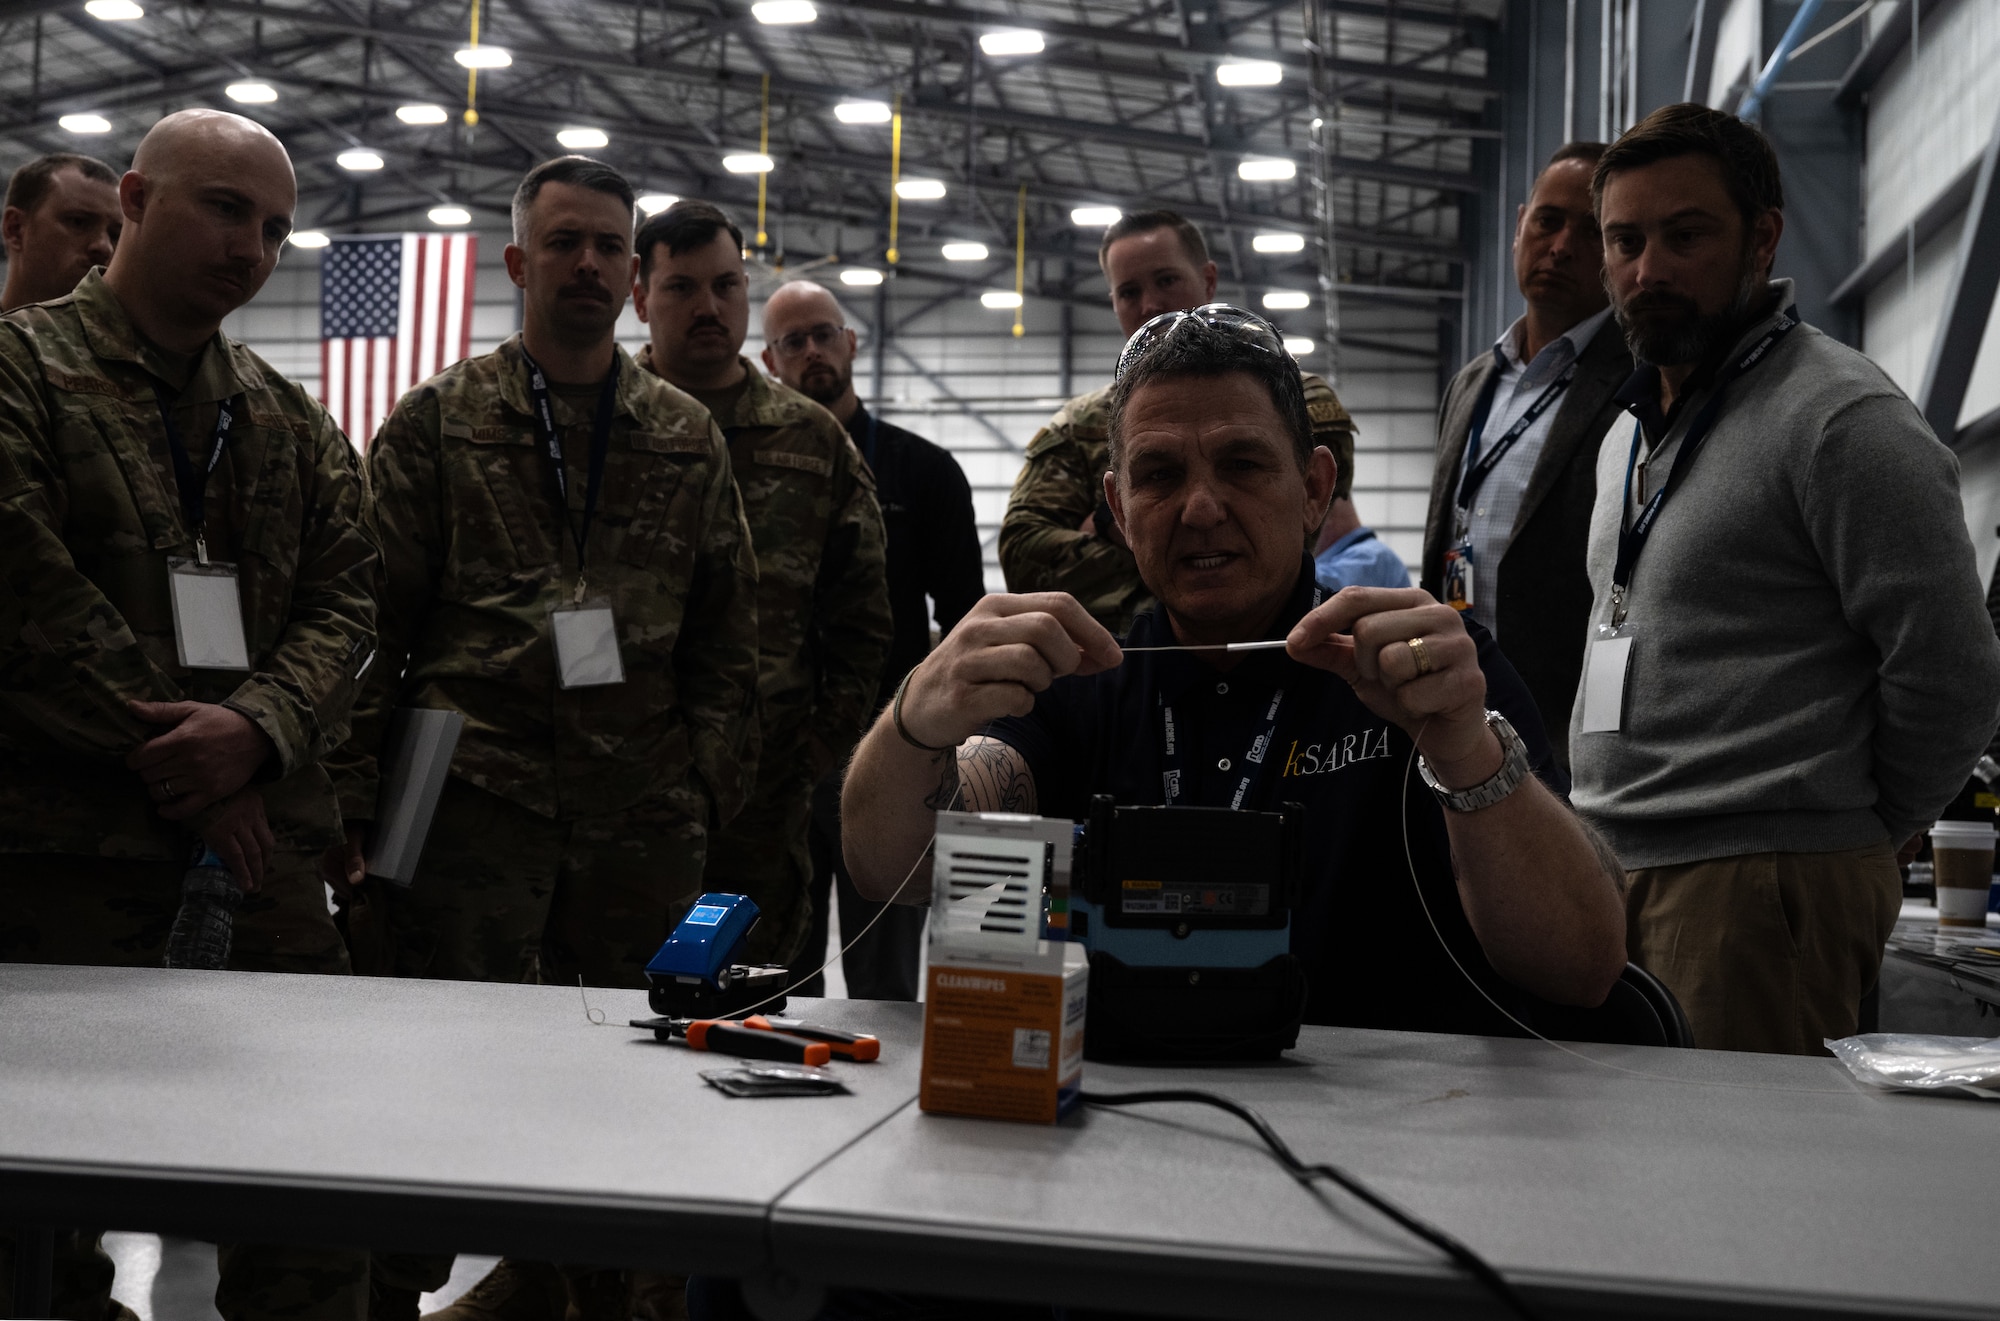 Richard Timberlake, kSARIA west coast training manager, demonstrates repairing fiber optic cables using his company’s technology during STRATO-Tech, a convention for the sustainment of the KC-135 Stratotanker, April 24, 2024, in Wichita, Kansas. STRATO-Tech aims to bring the U.S. Air Force together with outside agencies to collaborate on innovative technology for the KC-135. (U.S. Air Force photo by Staff Sgt. Tryphena Mayhugh)